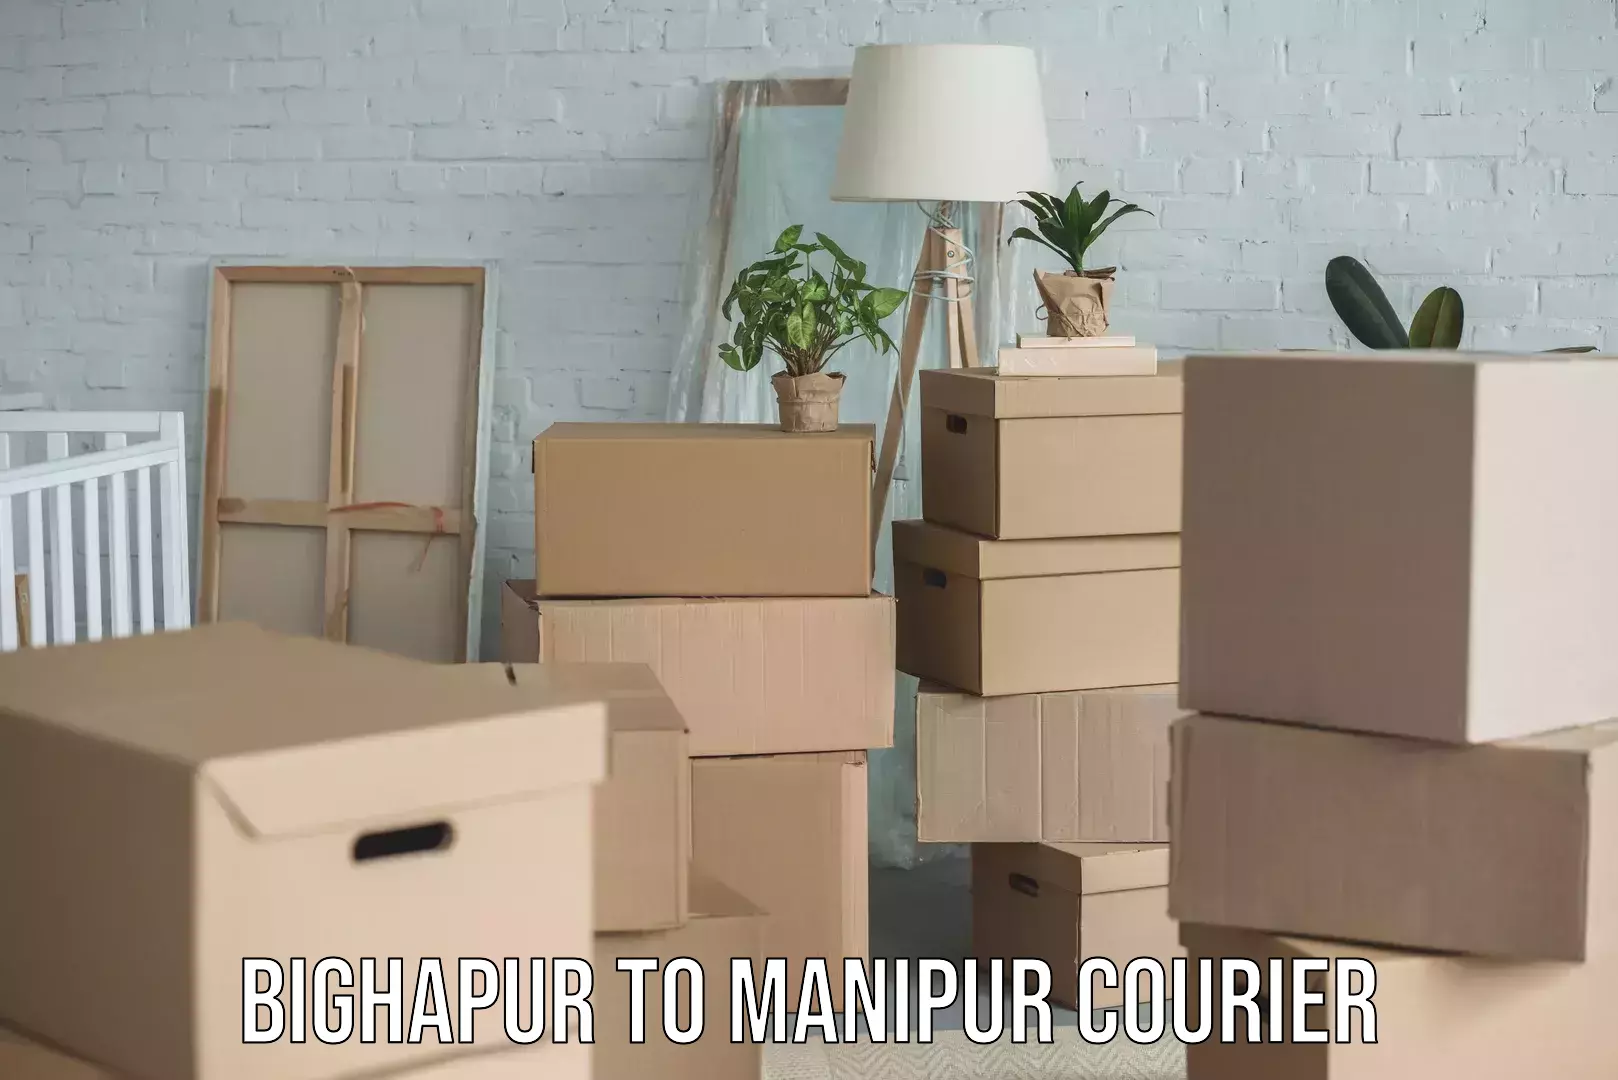 Local delivery service Bighapur to Manipur